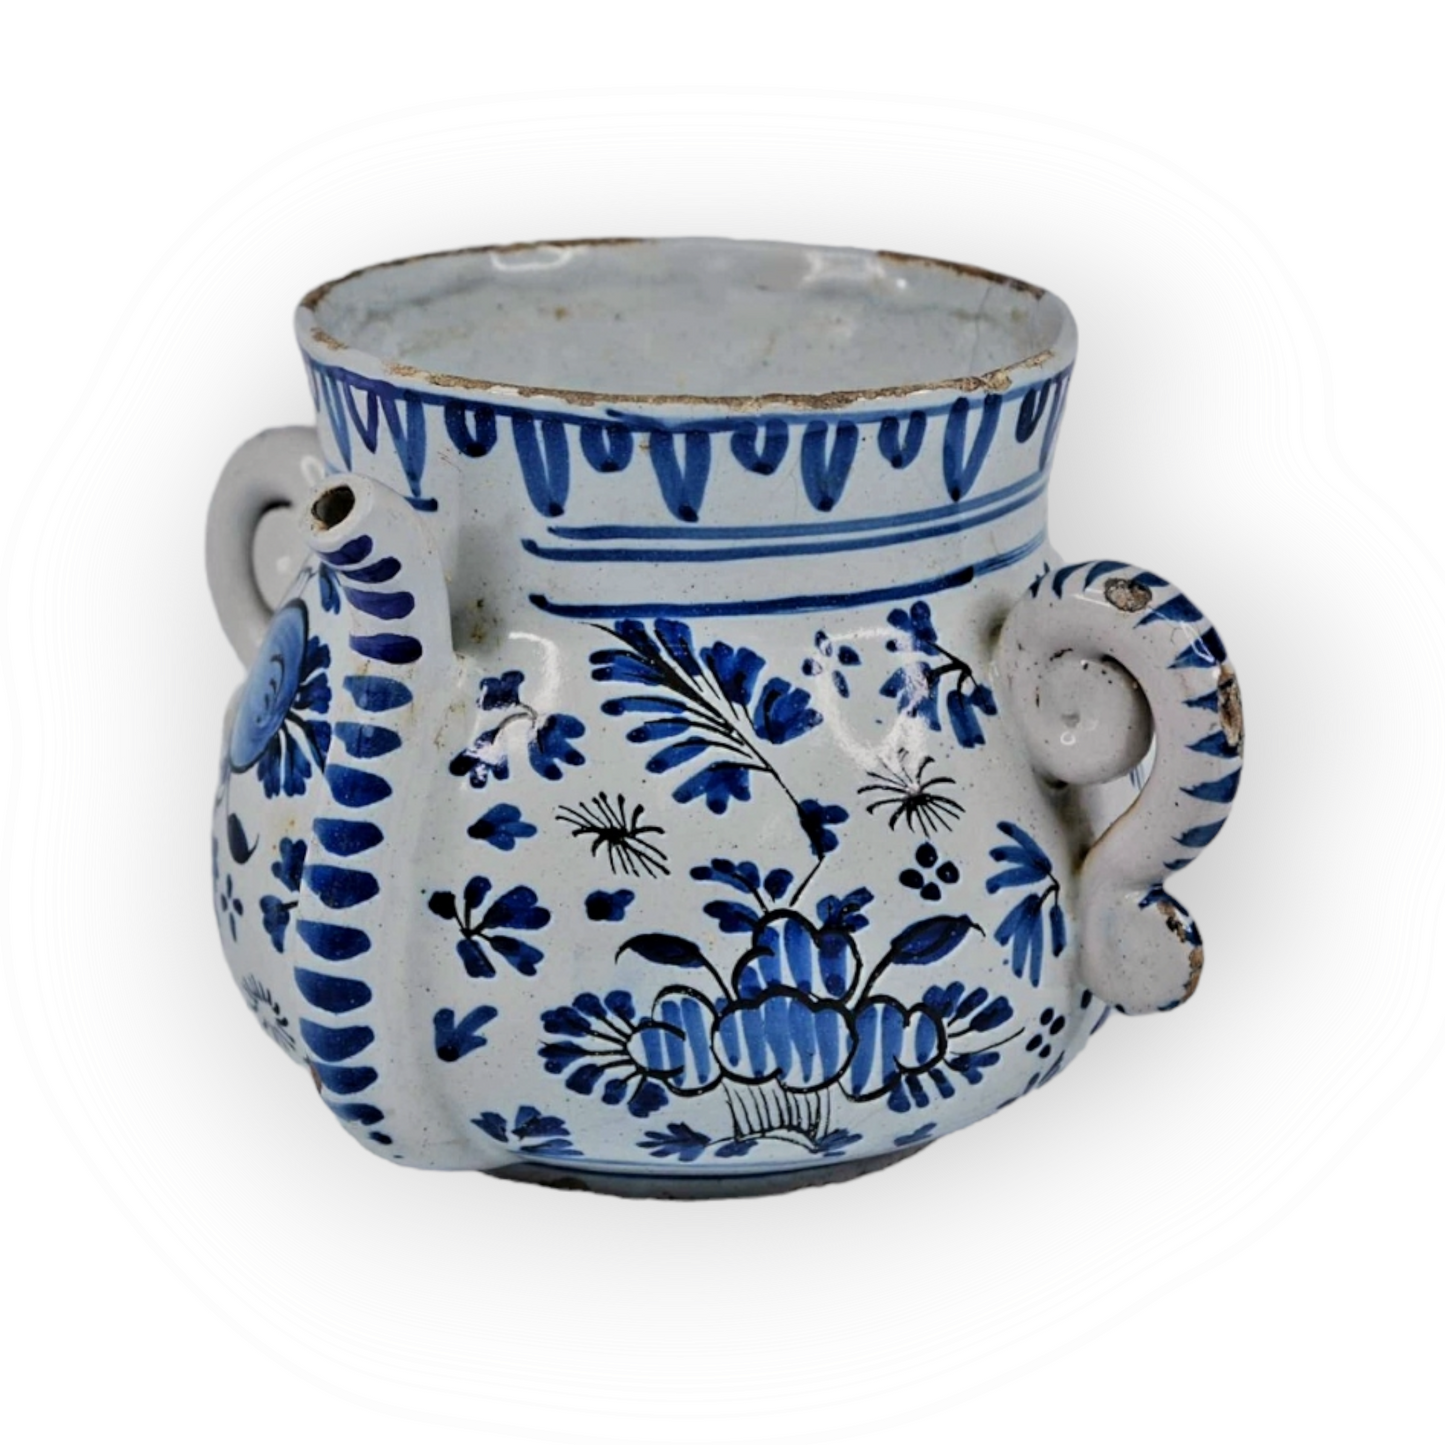 Early 18thC English Antique Blue & White Delftware Posset Pot, Attributed to London, Circa 1700